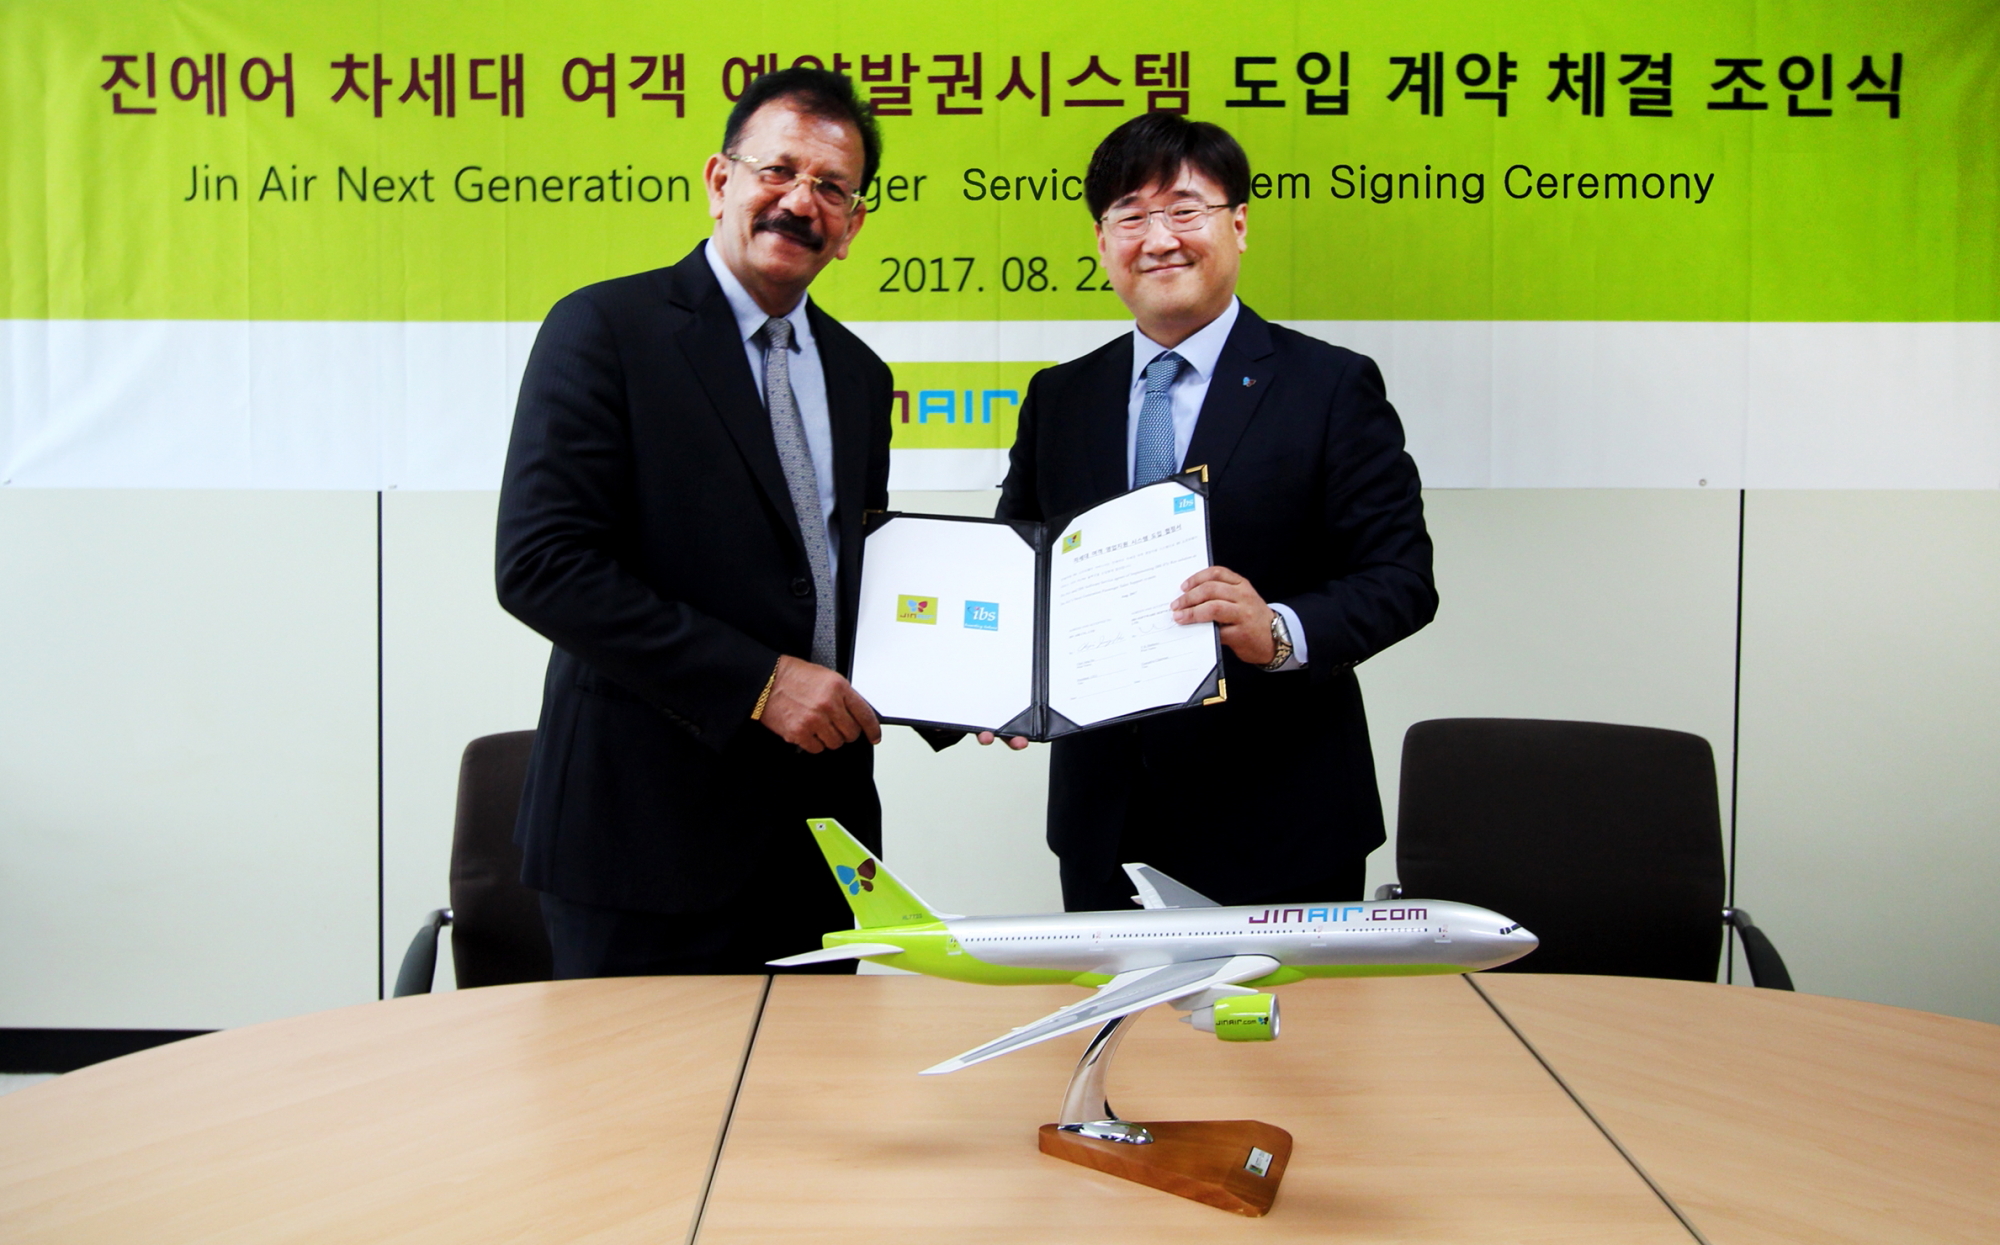 South Korea's Jin Air has signed a contract with IBS, a global aviation IT service company, to implement the iFly Res Passenger Services System (PSS). The contract ceremony was attended by chief representatives, including Mr. Choi Jeong-ho, President and CEO of Jin Air and Mr. V.K Matthew, Chairman of IBS. Click to enlarge.